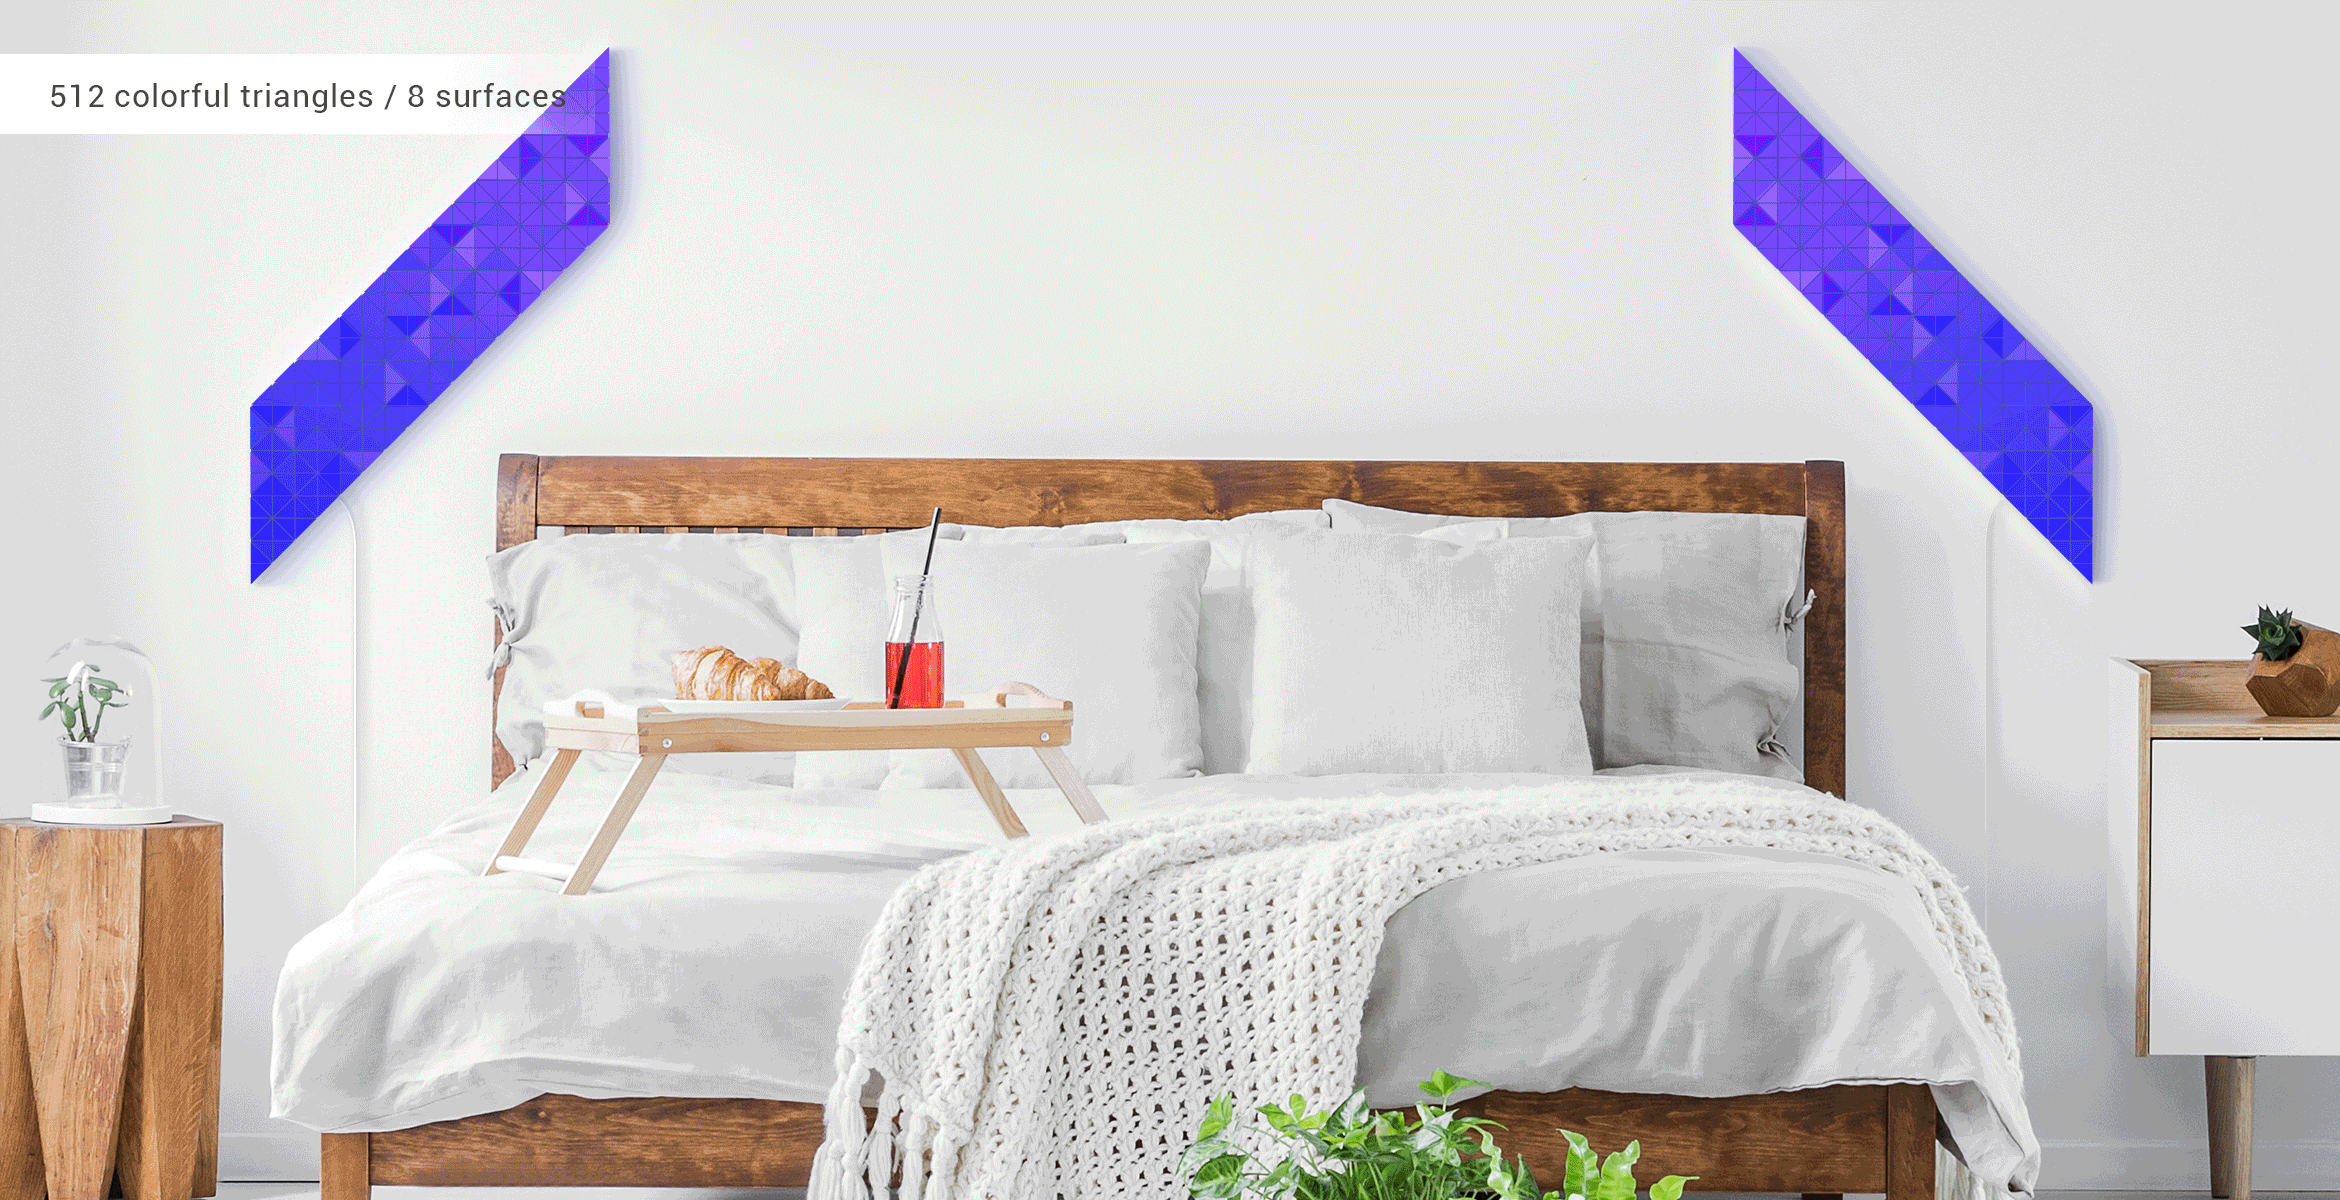 Two-lines shape, assembled from 4 smart light surfaces each, complements the bedroom interior and light up in different colors